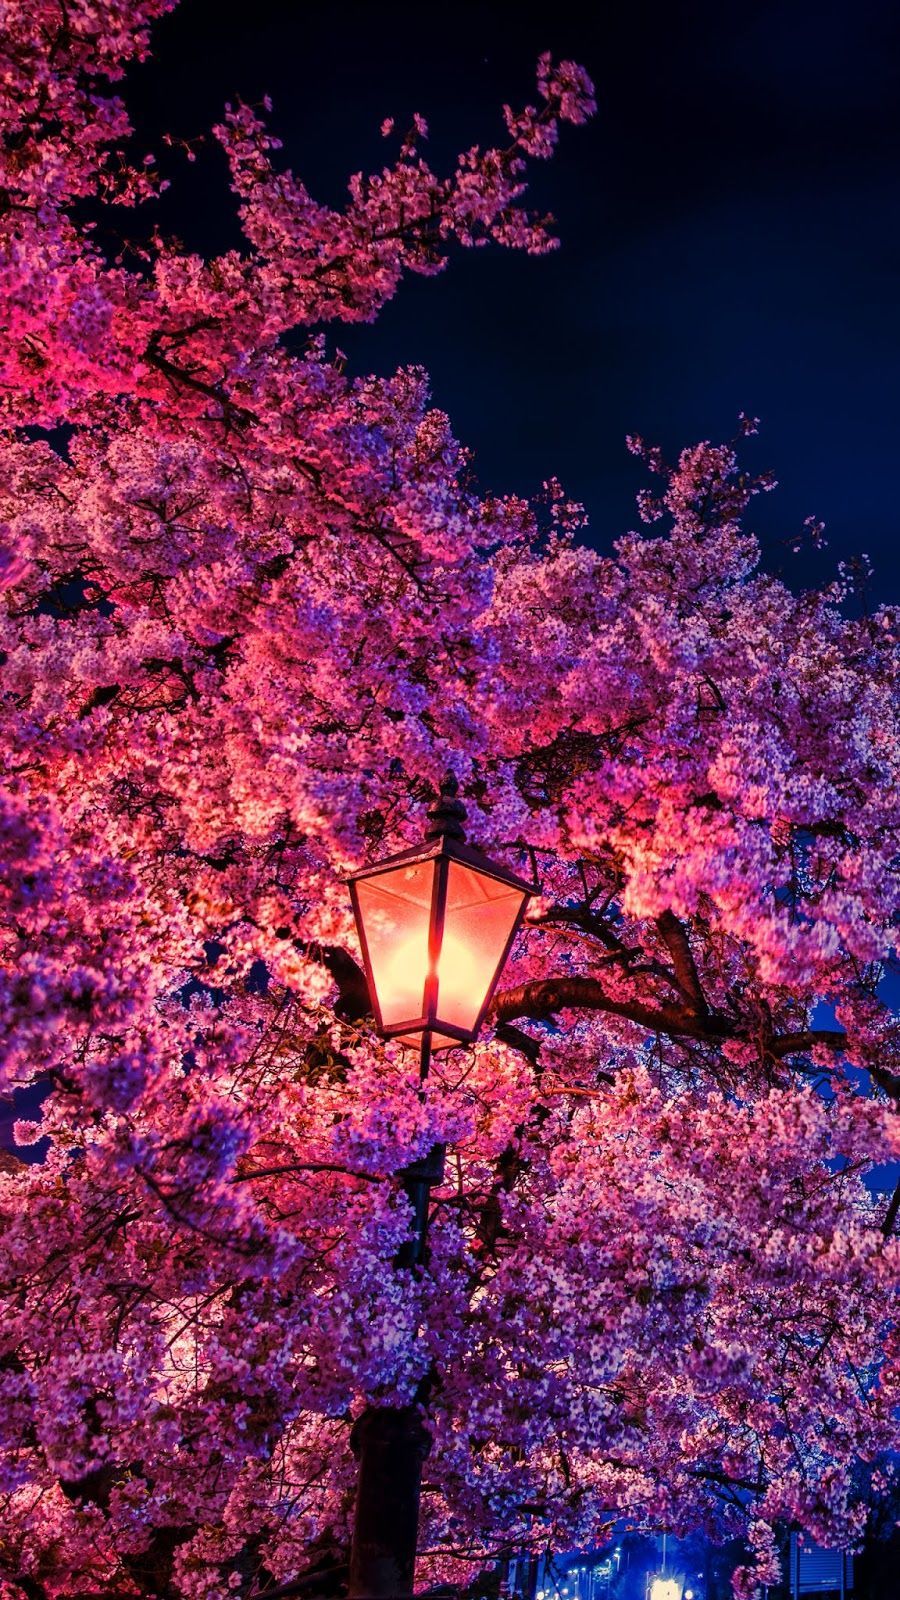 Cherry blossom in the night #wallpaper #iphone #android #background #followme. Cherry blossom wallpaper, Cherry blossom wallpaper iphone, Aesthetic wallpaper